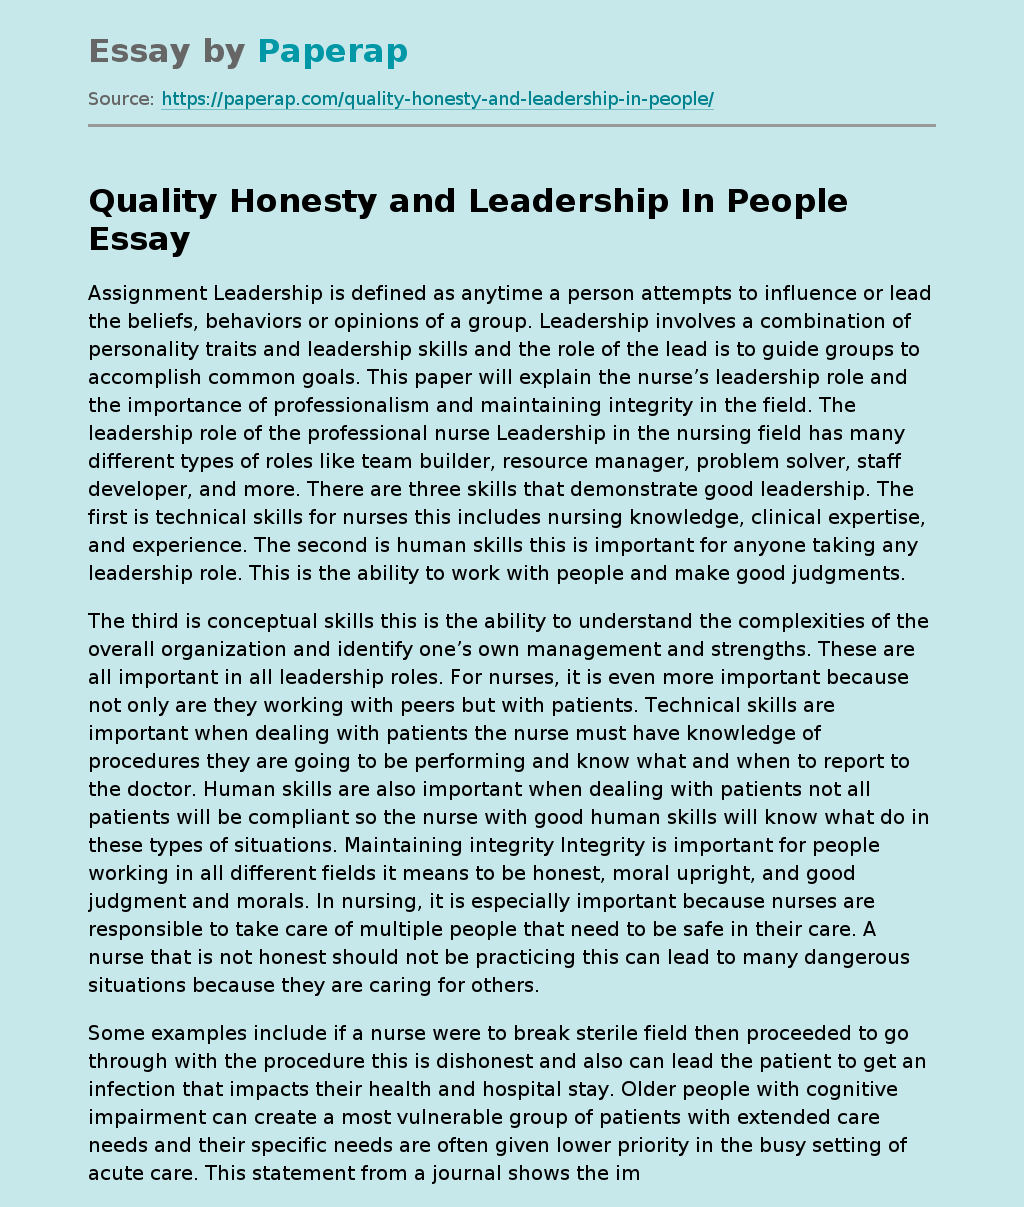 Quality Honesty and Leadership In People